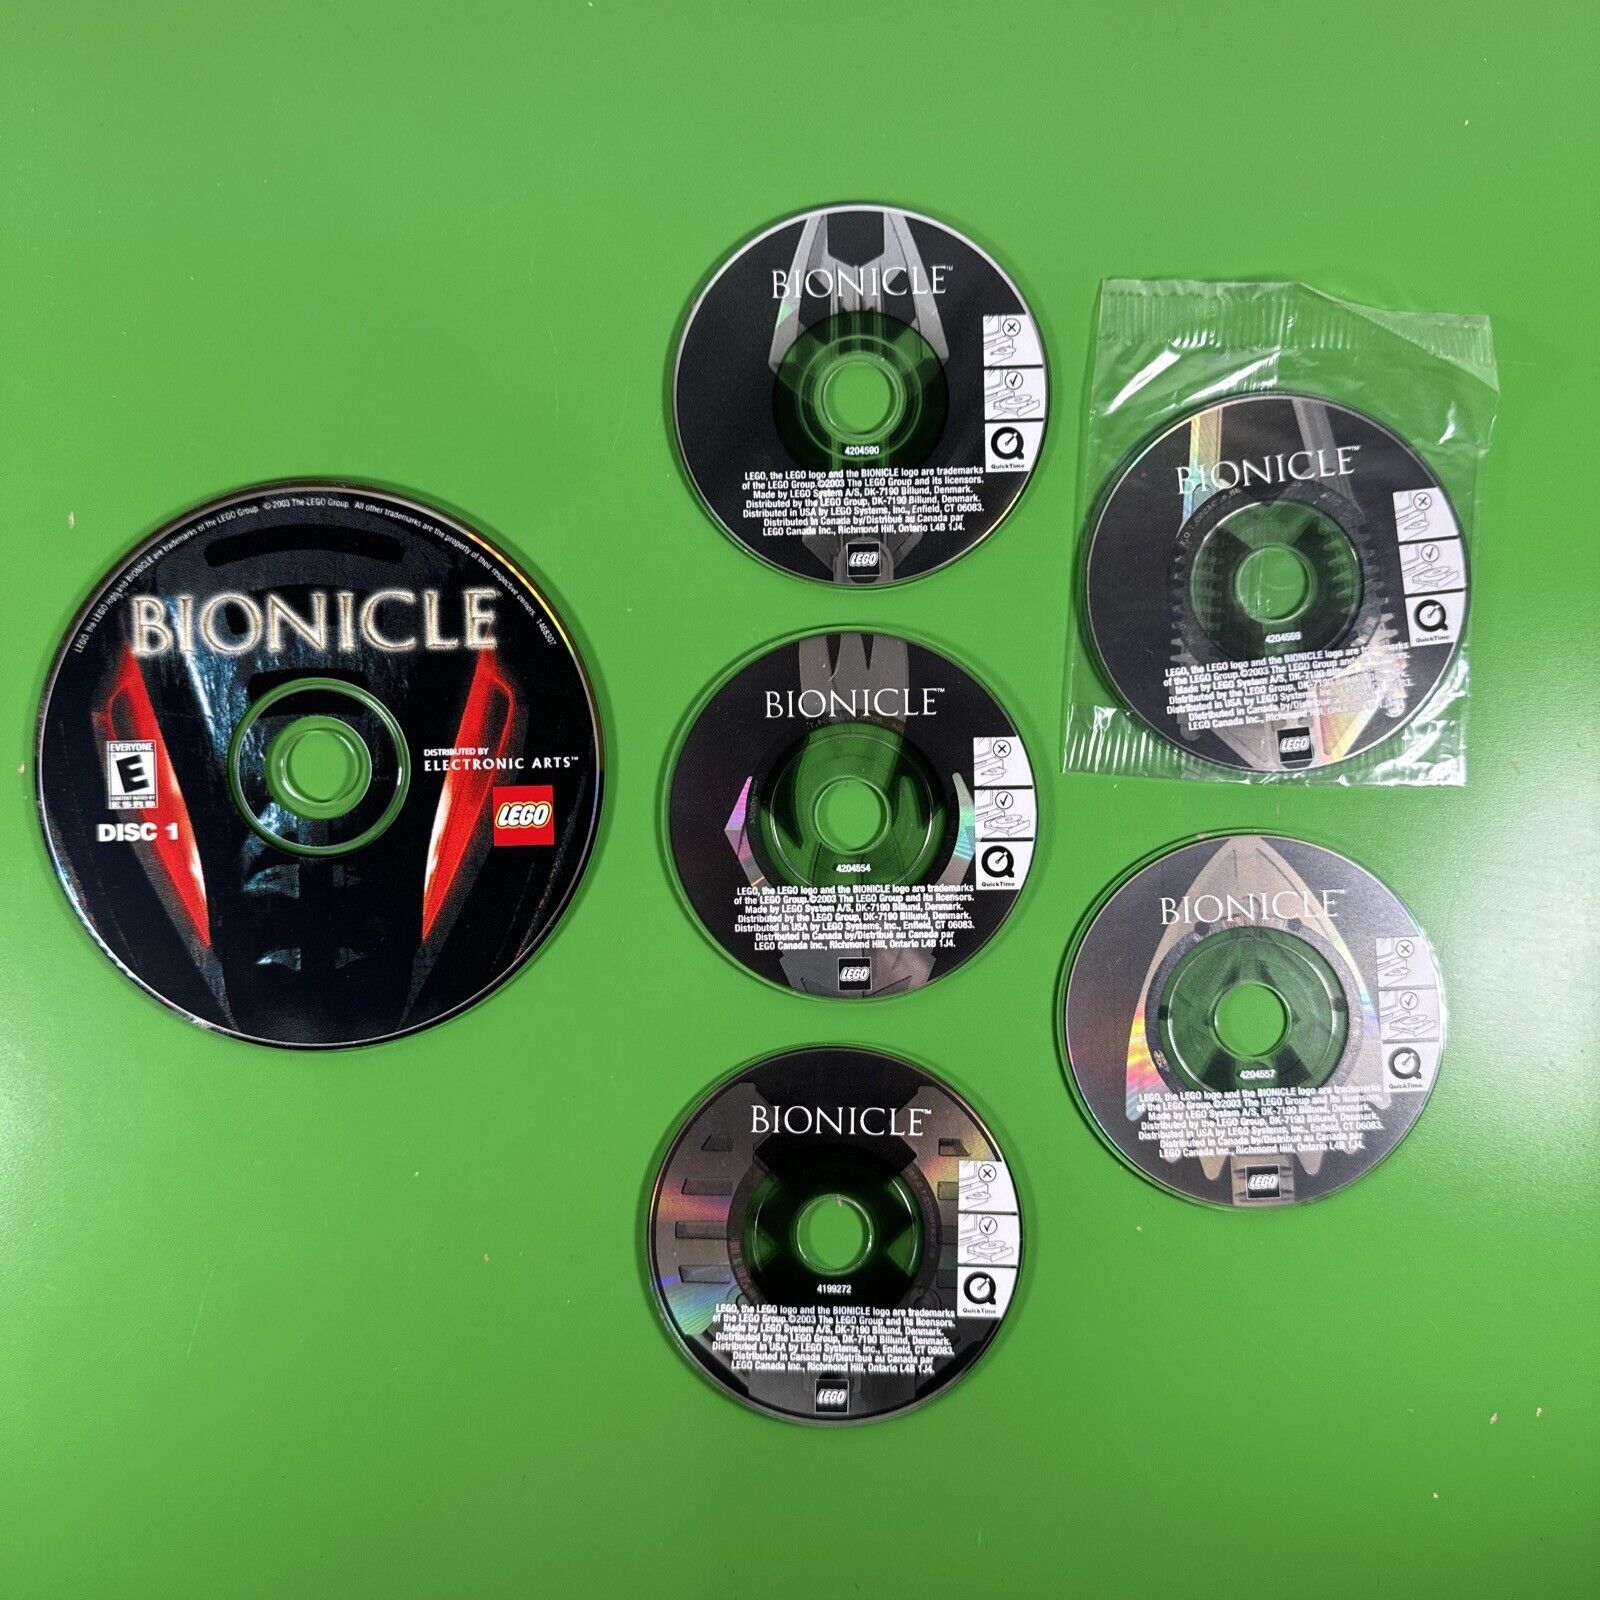 PC Game Lot of 6: LEGO BIONICLE Disc 1 + Bionicle Mini Discs | Collectible Games